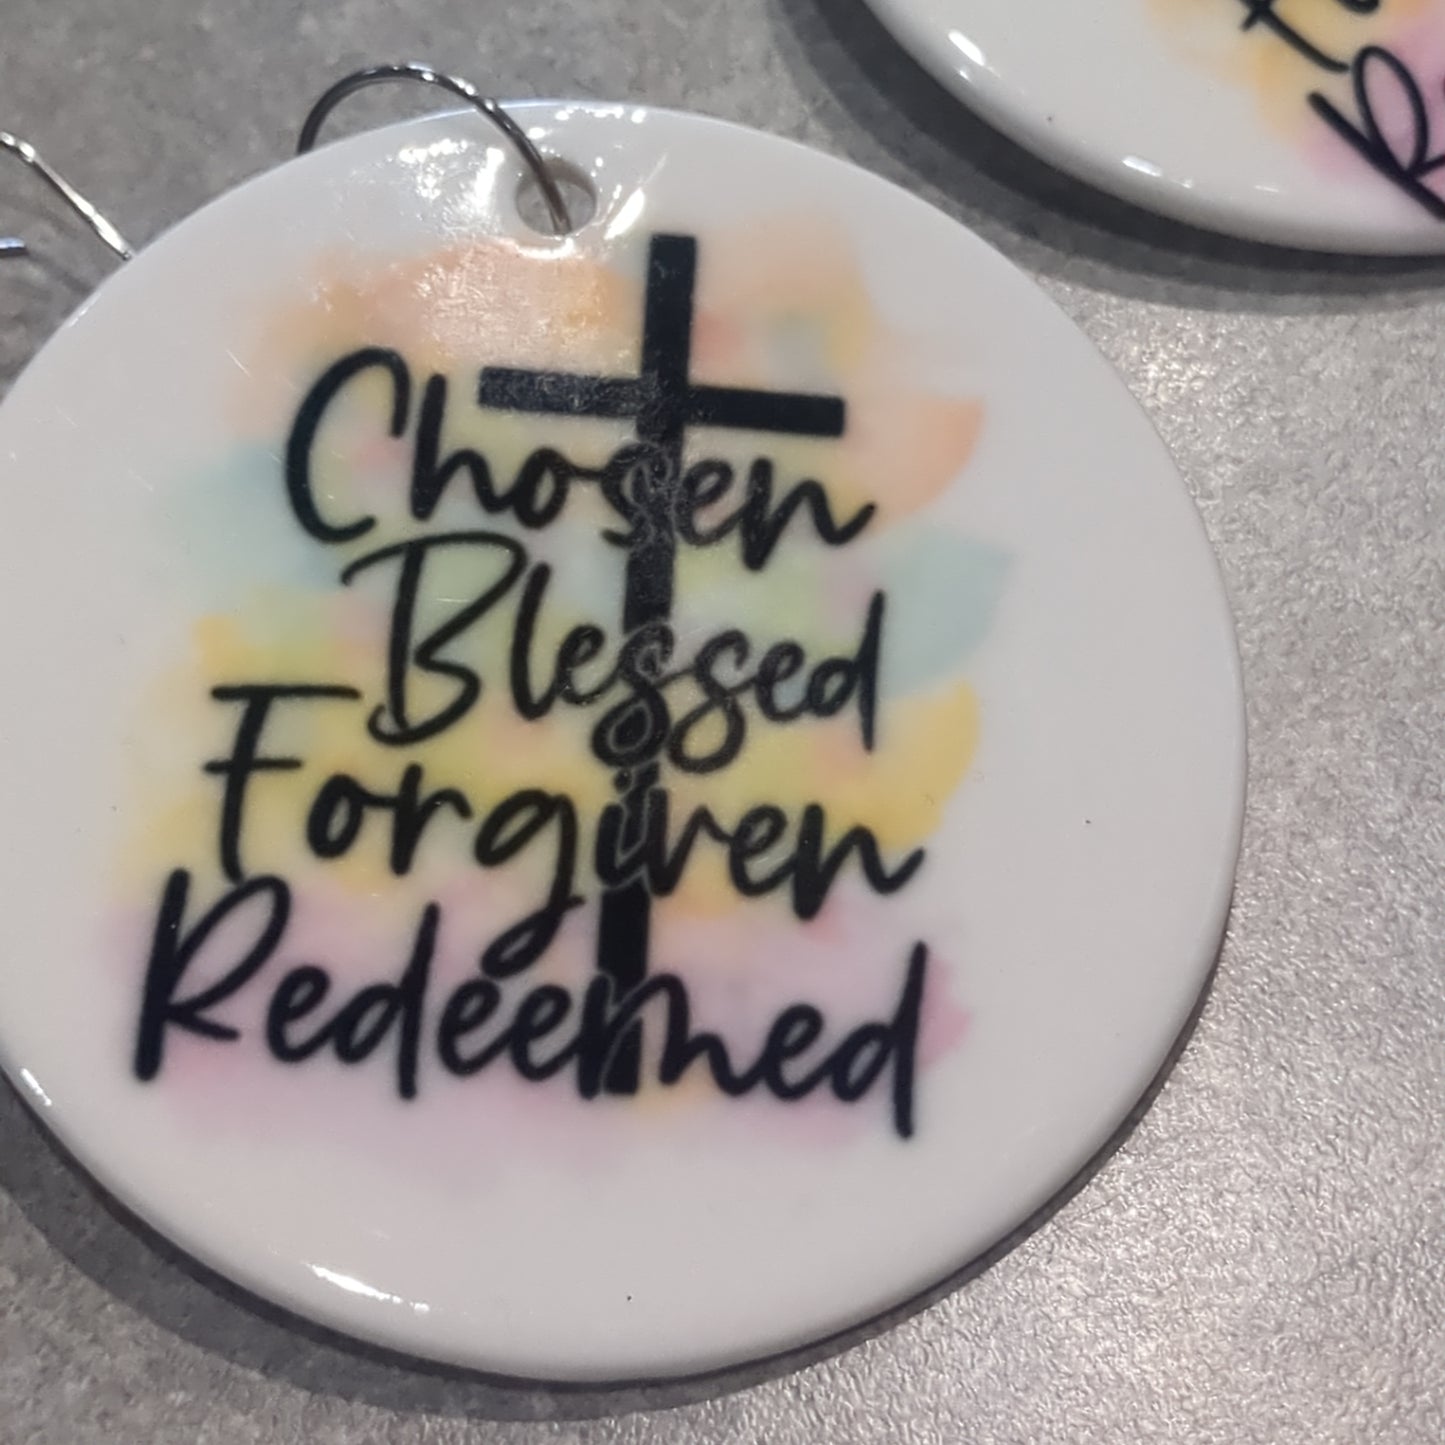 Ceramic ornament with a cross chosen blessed forgiven reading